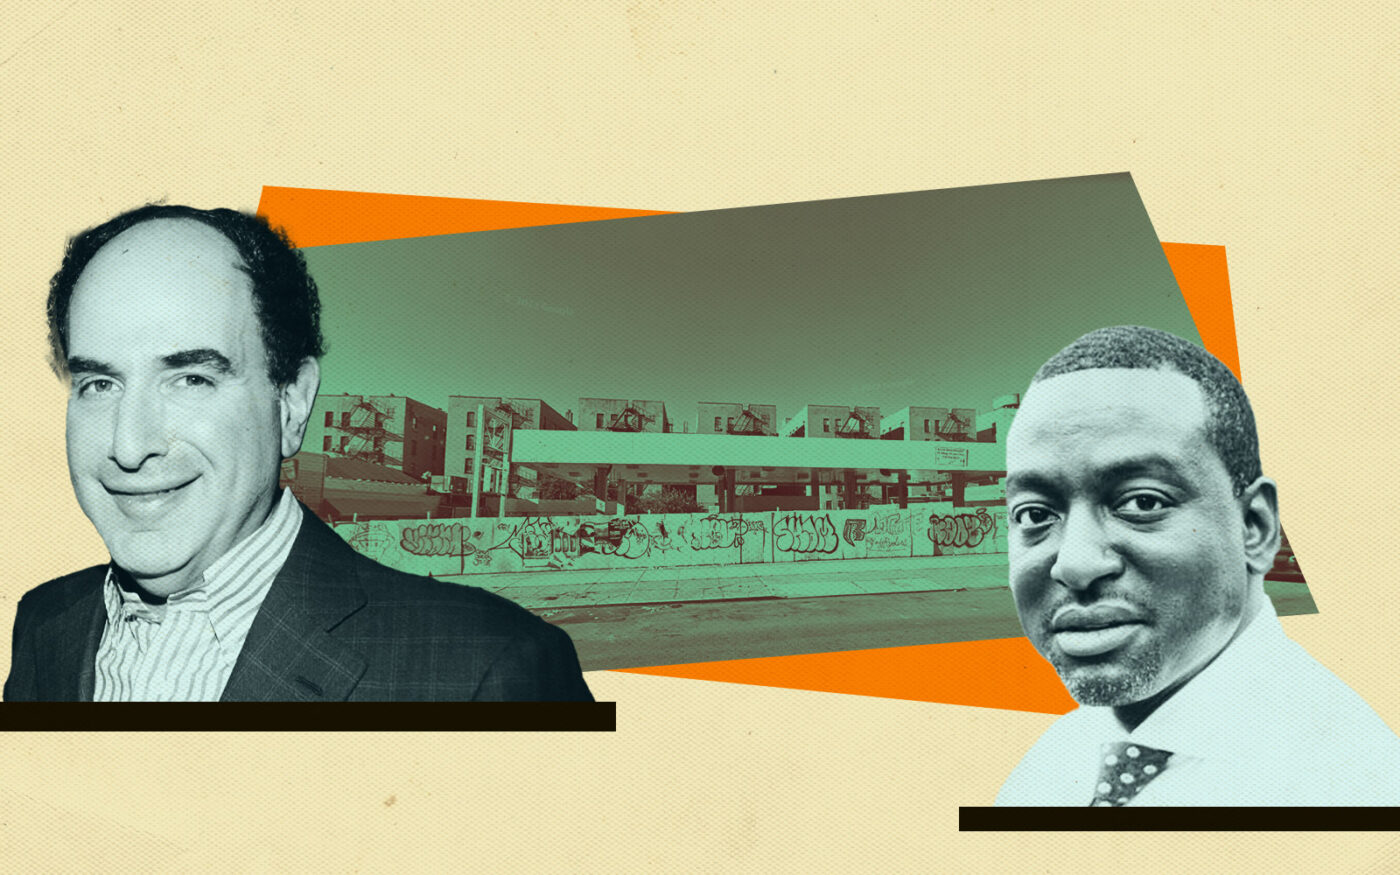 Bruce Teitelbaum, Council Member Yusef Salaam, West 145th Street and Malcolm X Boulevard  (Getty, Google Maps)